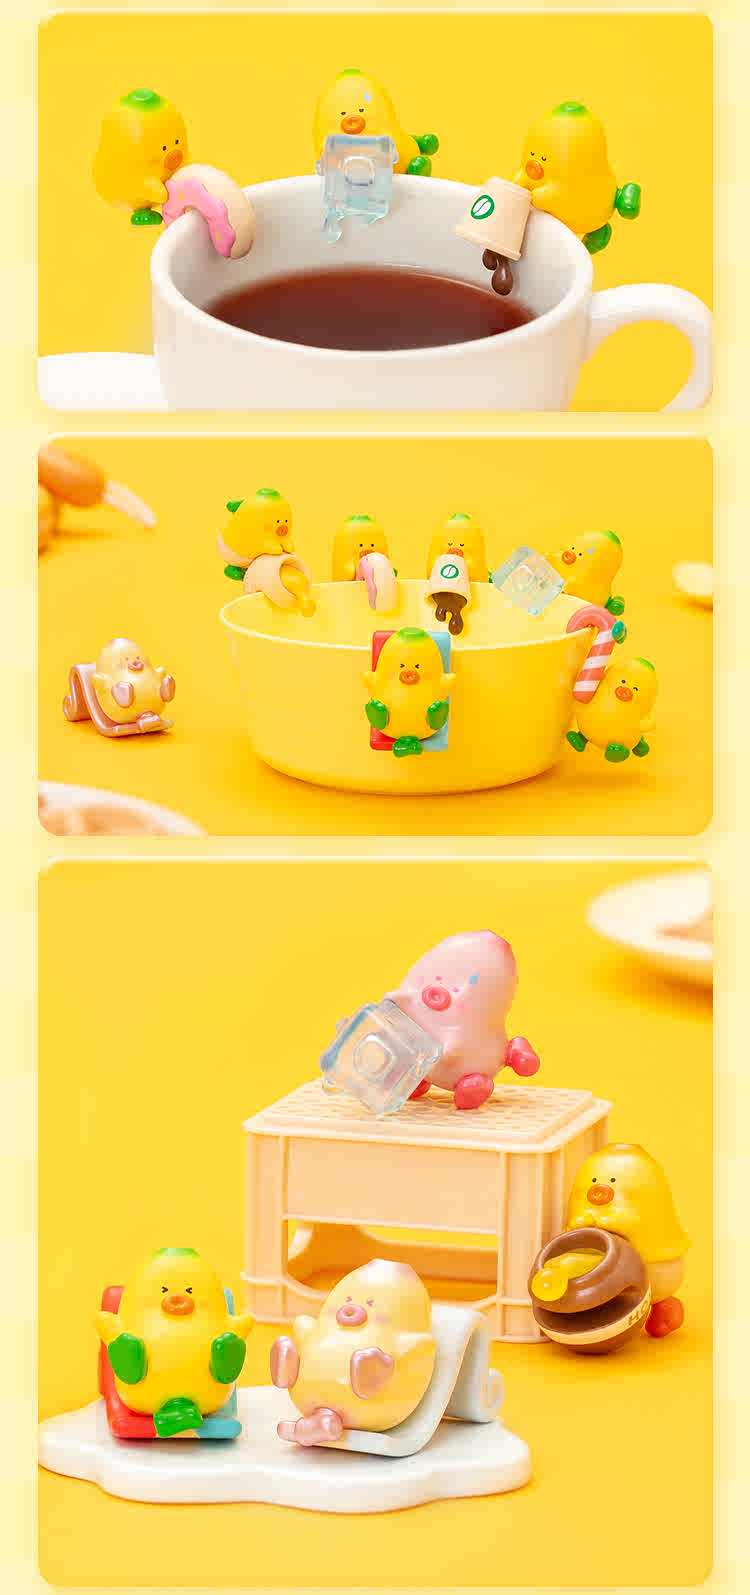 [MOETCH] BANAXBANA - Leisurely Afternoon Series Cup Edge Moetch Bean Series Blind Box